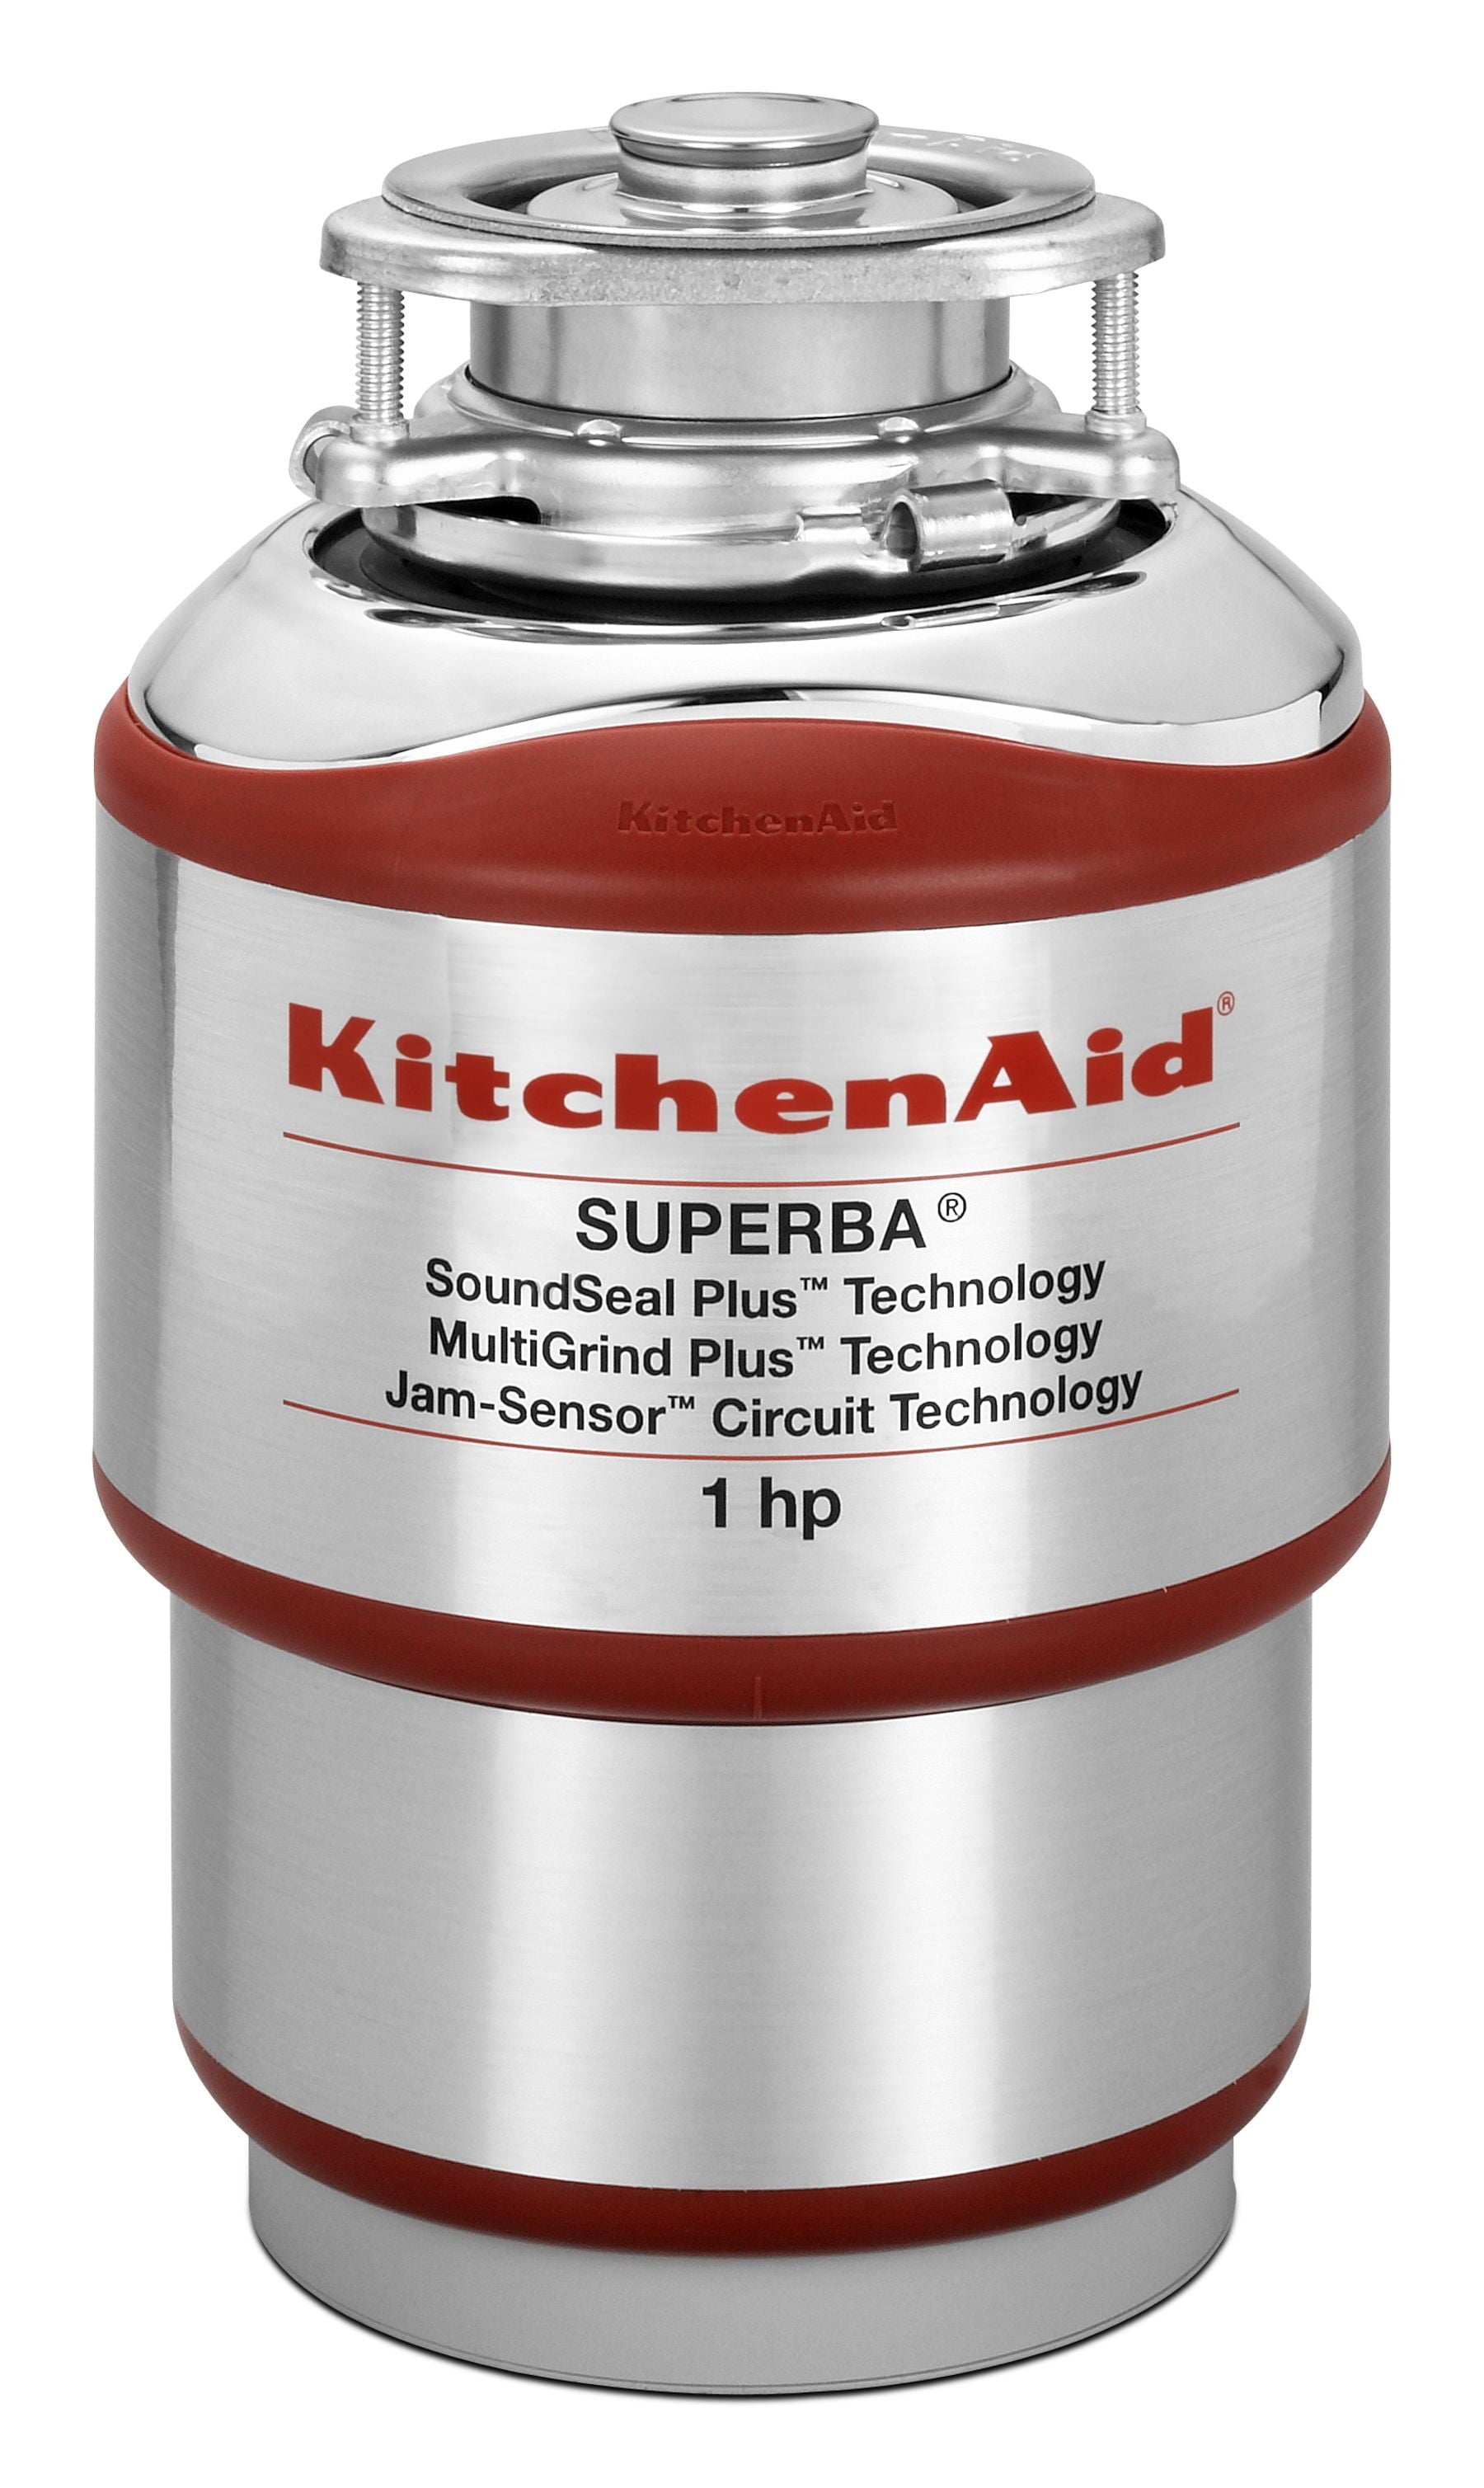 Kitchenaid KCDS100T 1-Horsepower Continuous Feed Food Waste Disposer - Red